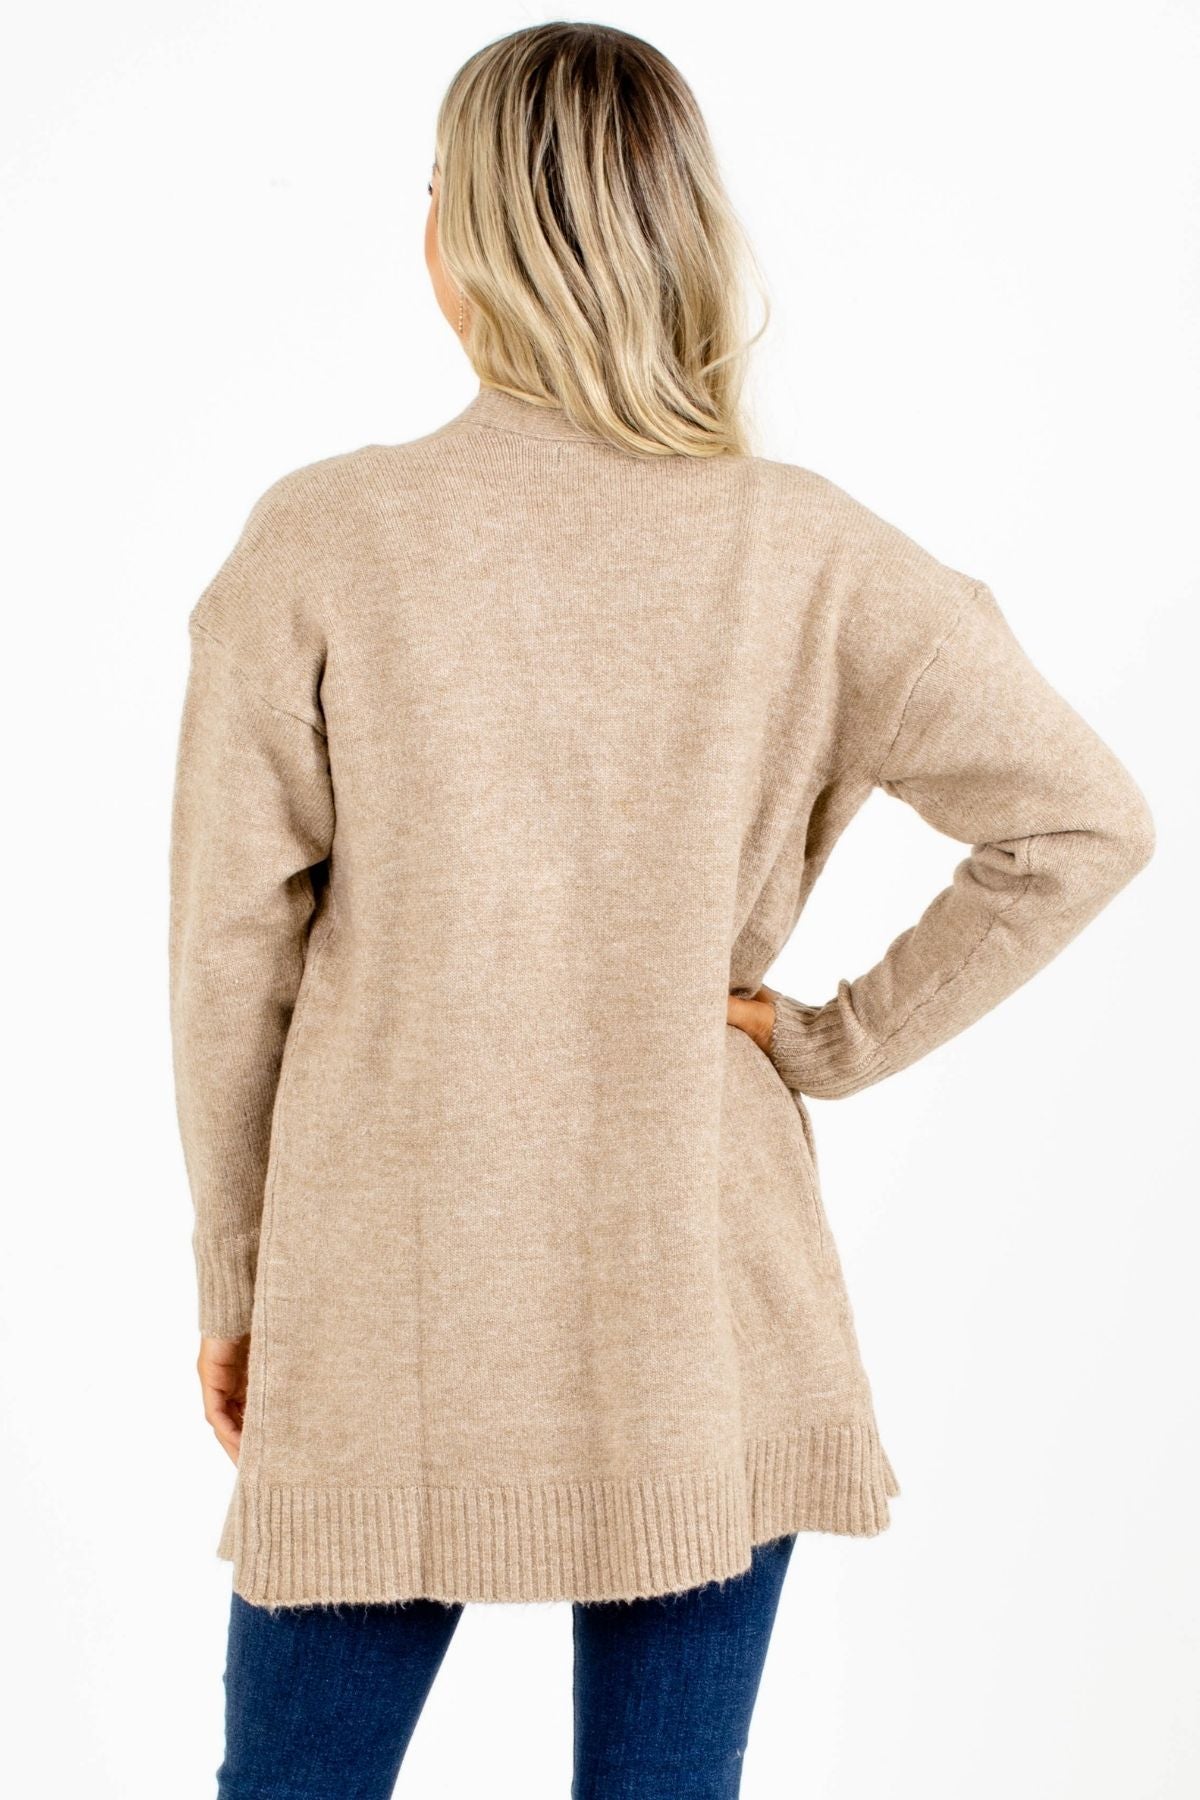 Women's Brown Boutique Cardigan with Pockets